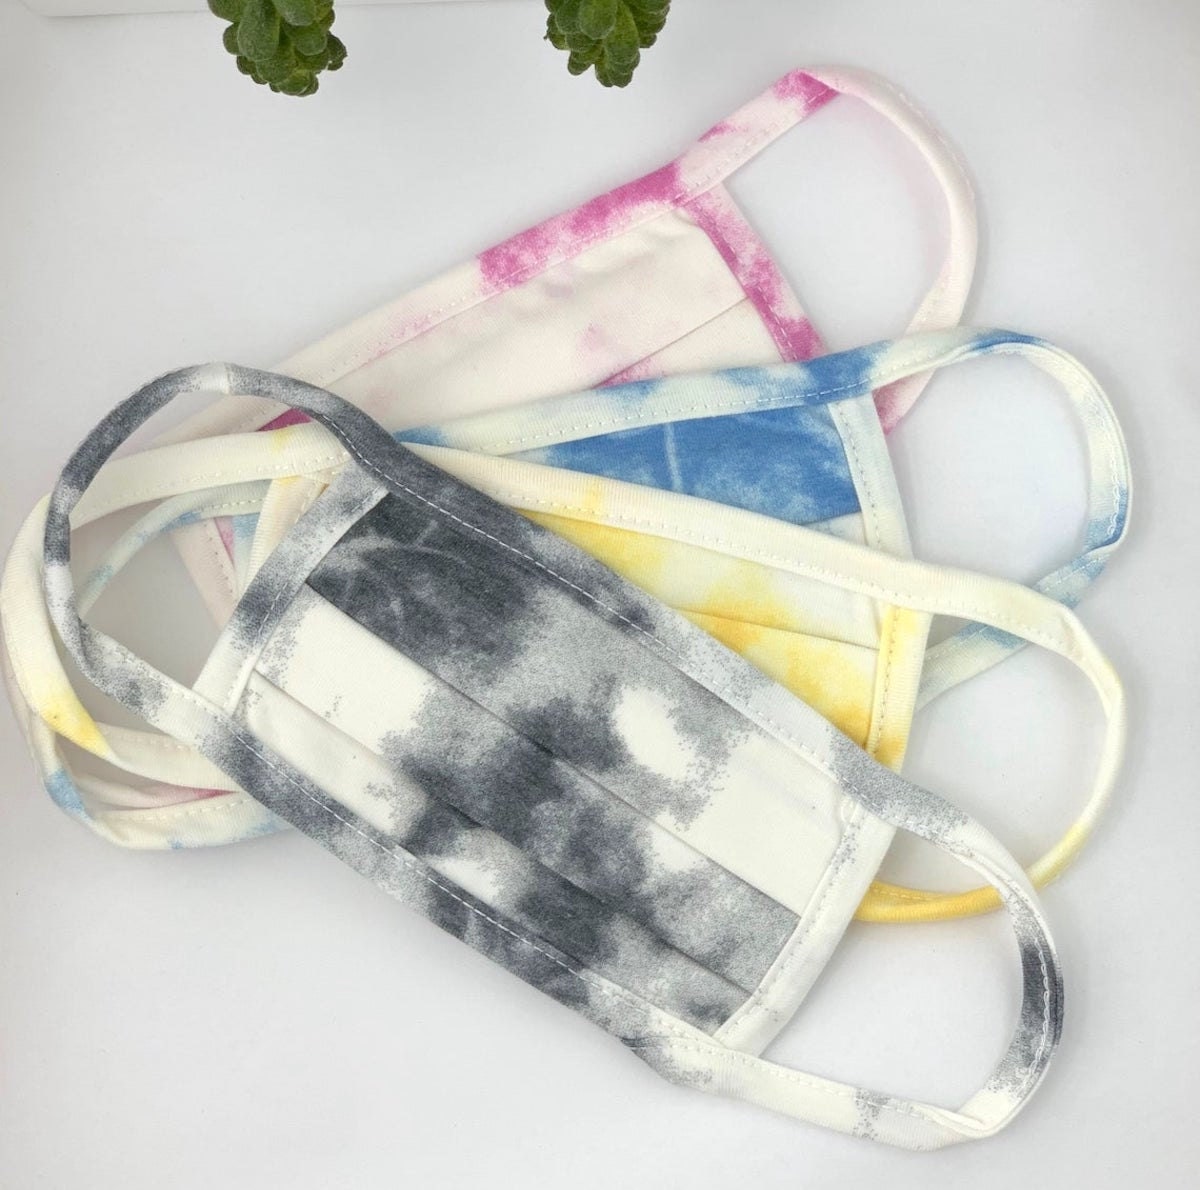 Tie-dye face masks from Find Your Mask on Etsy